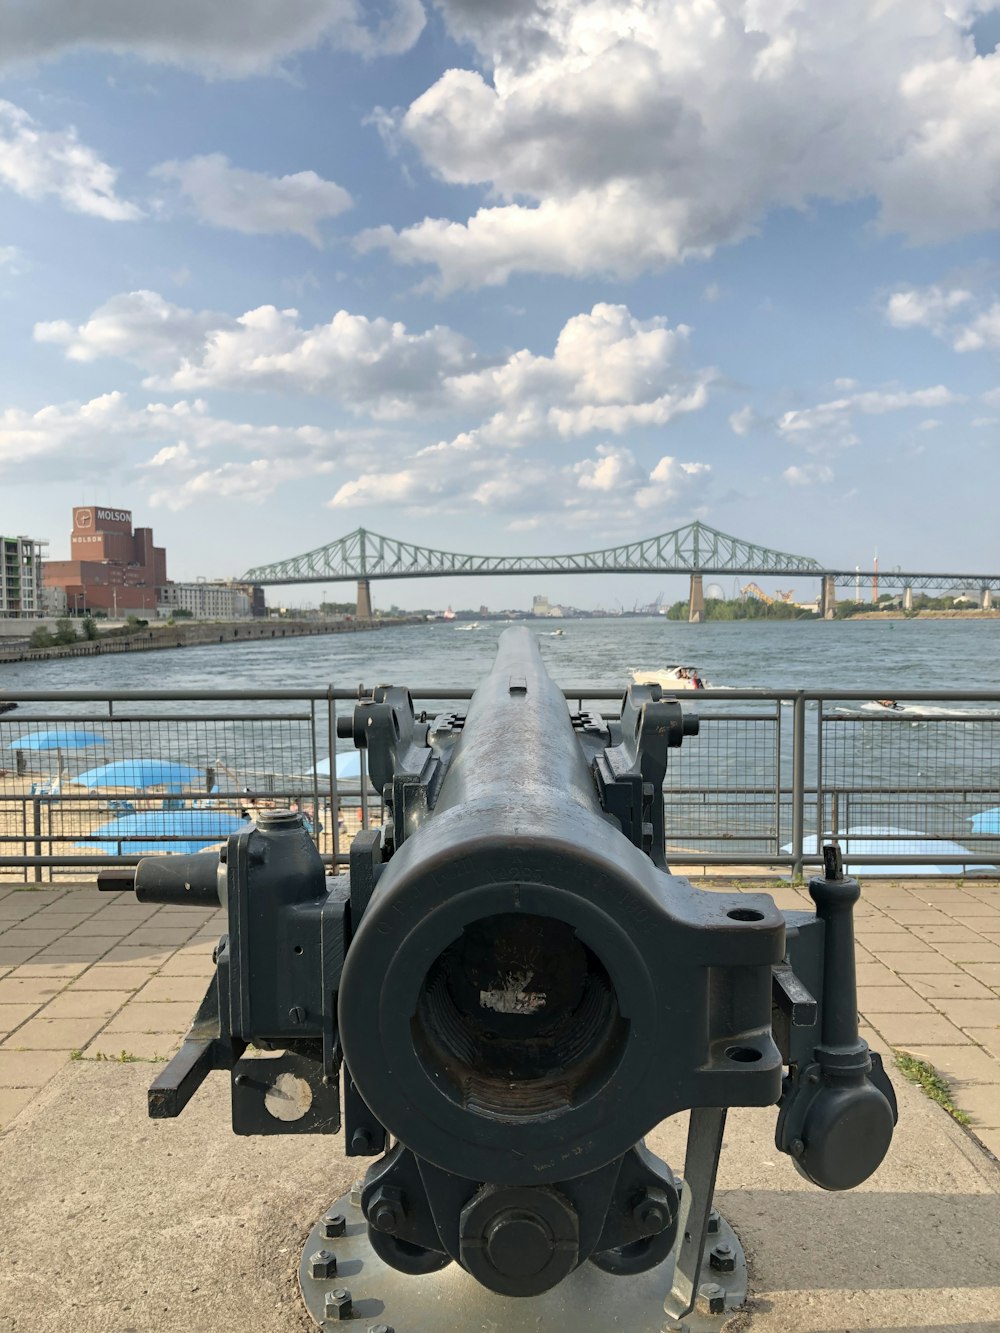 grey steel canon near body of water during daytime